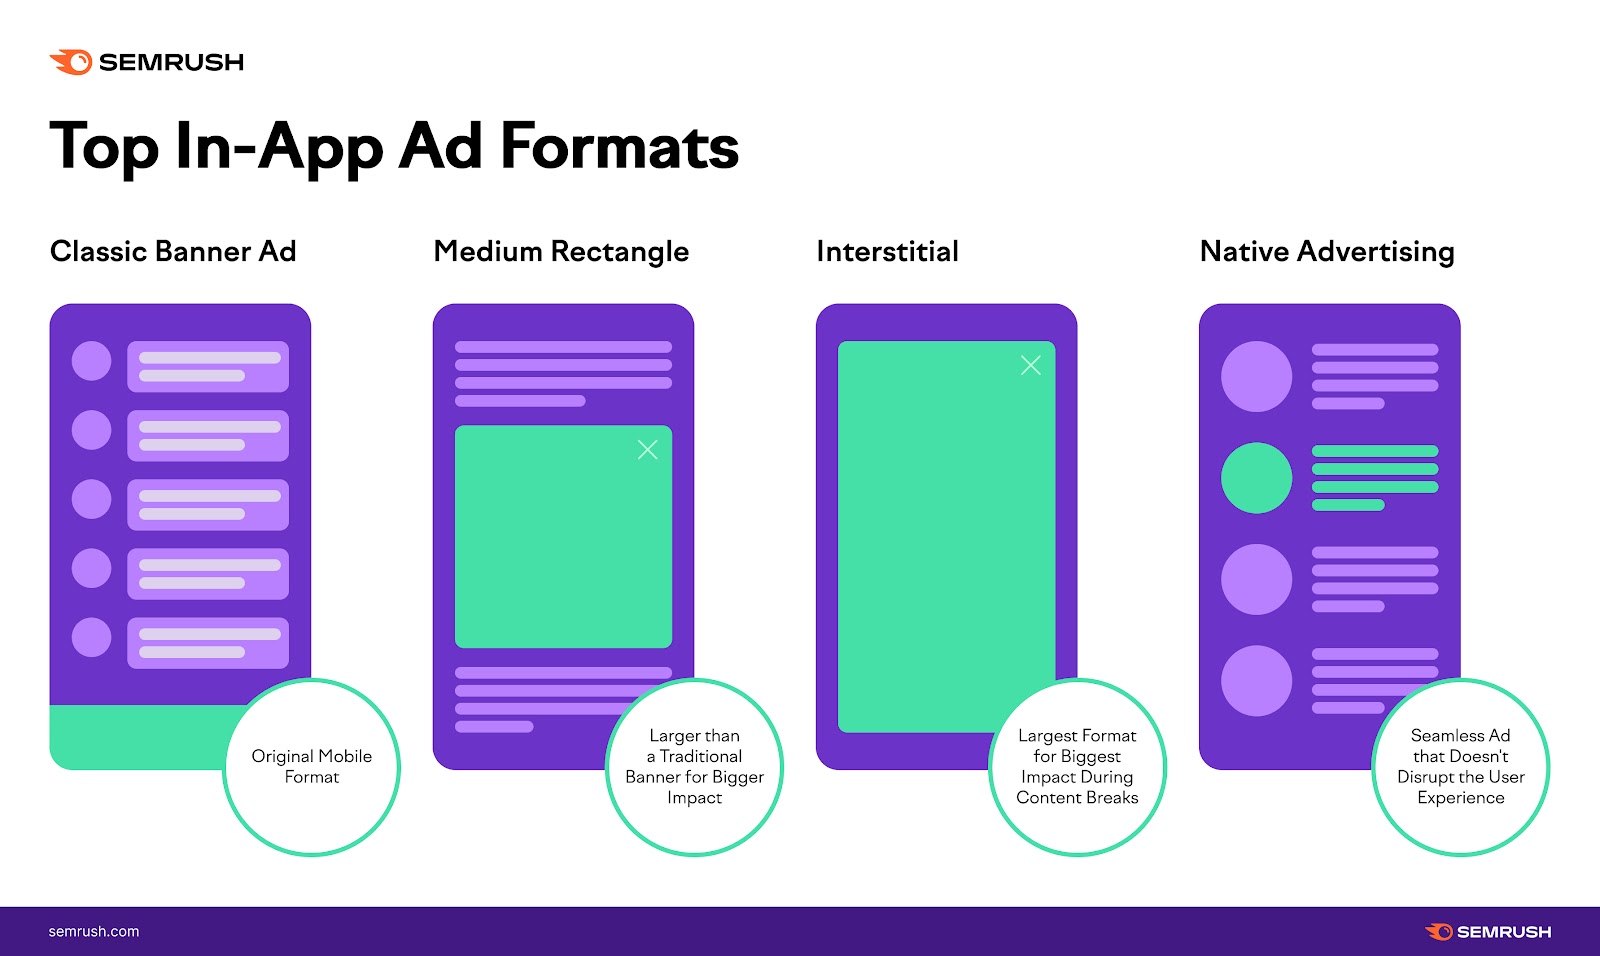 Examples of top in-app advertising formats, including classic banner ad, medium rectangle, interstitial and native advertising